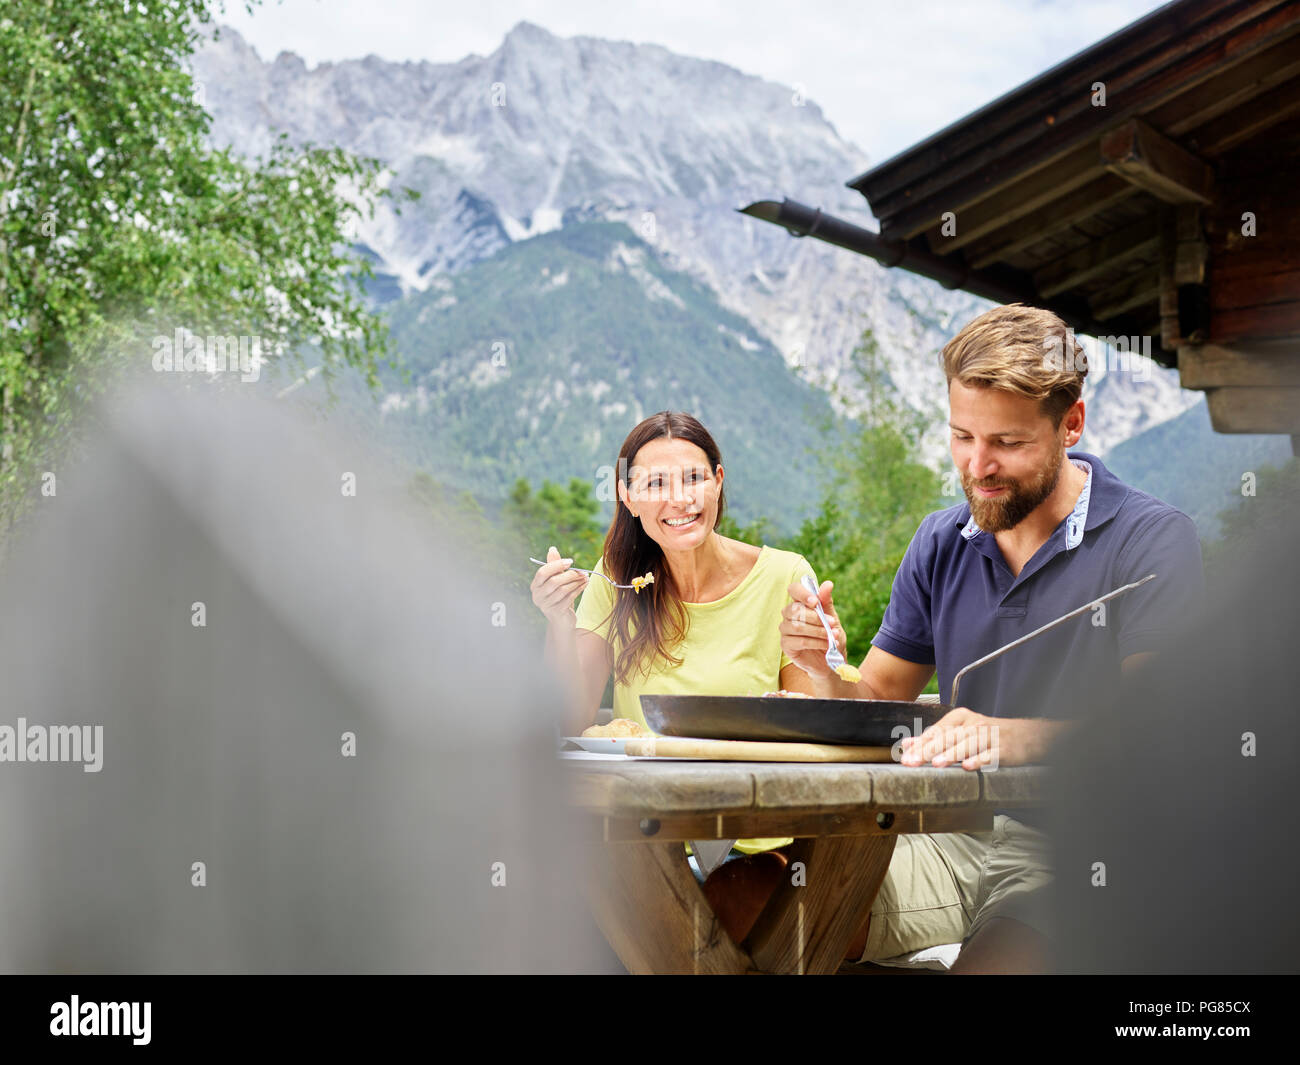 Happy couple having a snack at a hut in the mountains Stock Photo